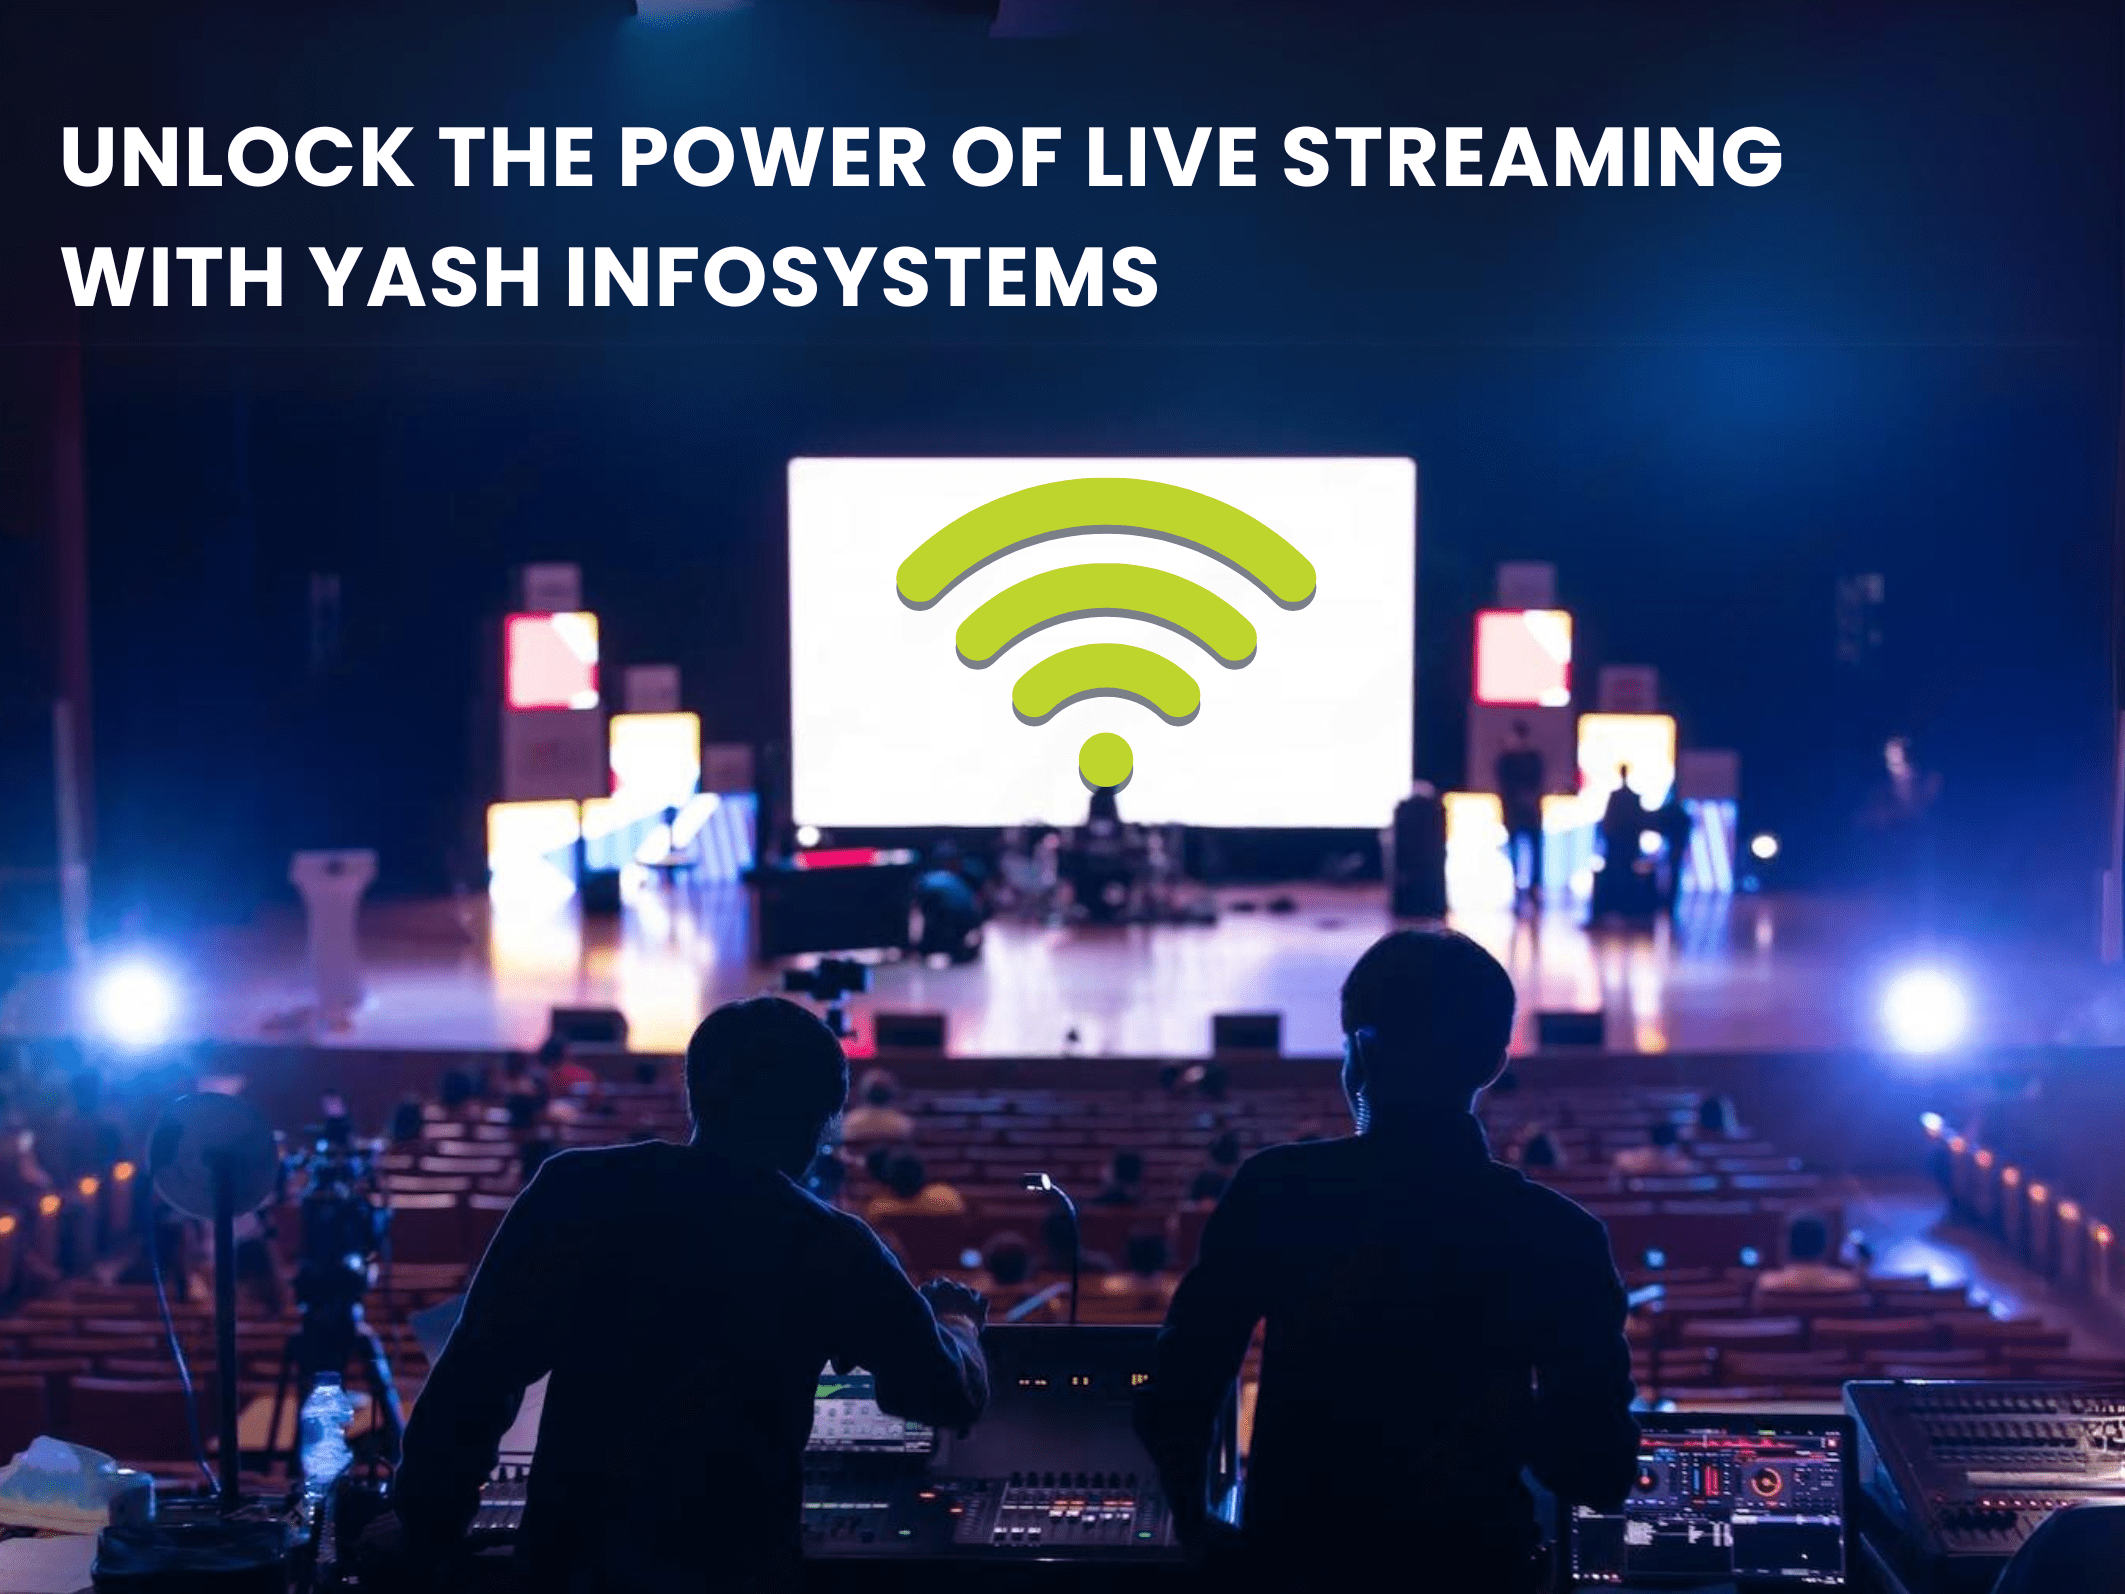 Event Wifi Internet - UNLOCK THE POWER OF LIVE STREAMING WITH YASH INFOSYSTEMS